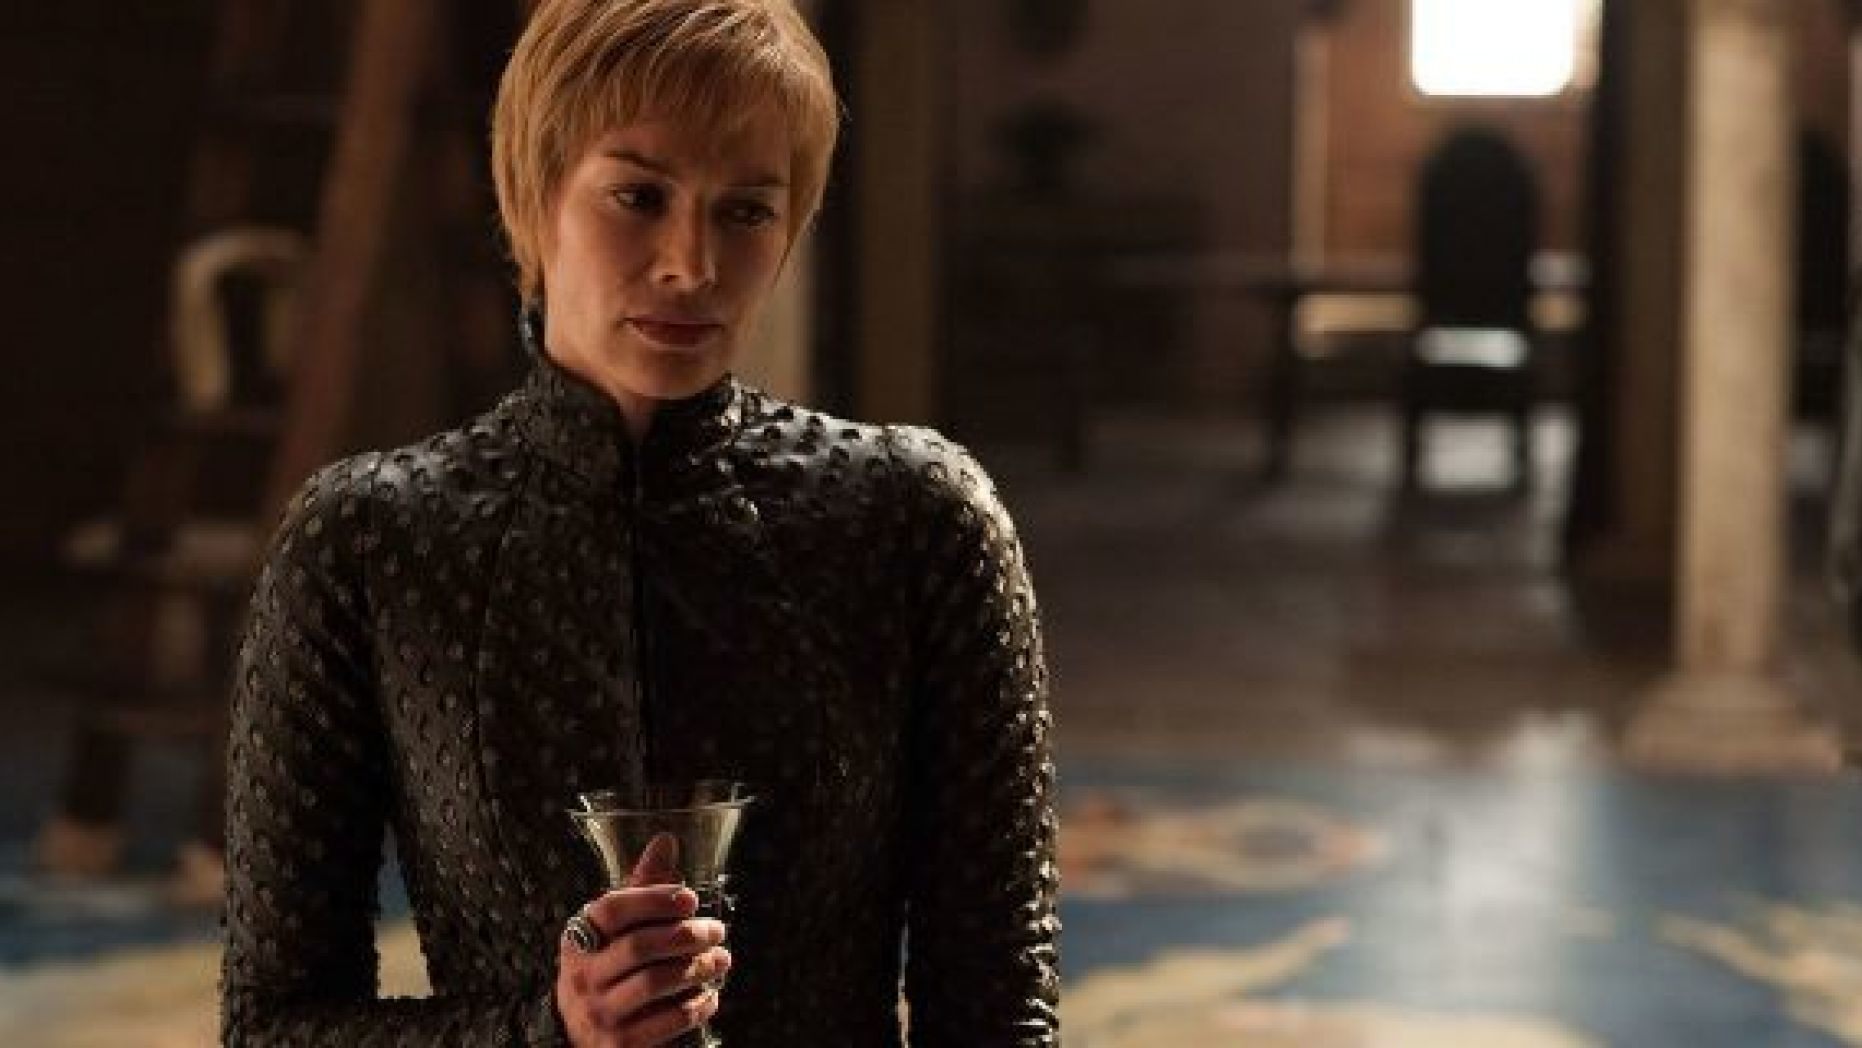 Lena Headey as Cersei Lannister in "Game of Thrones."